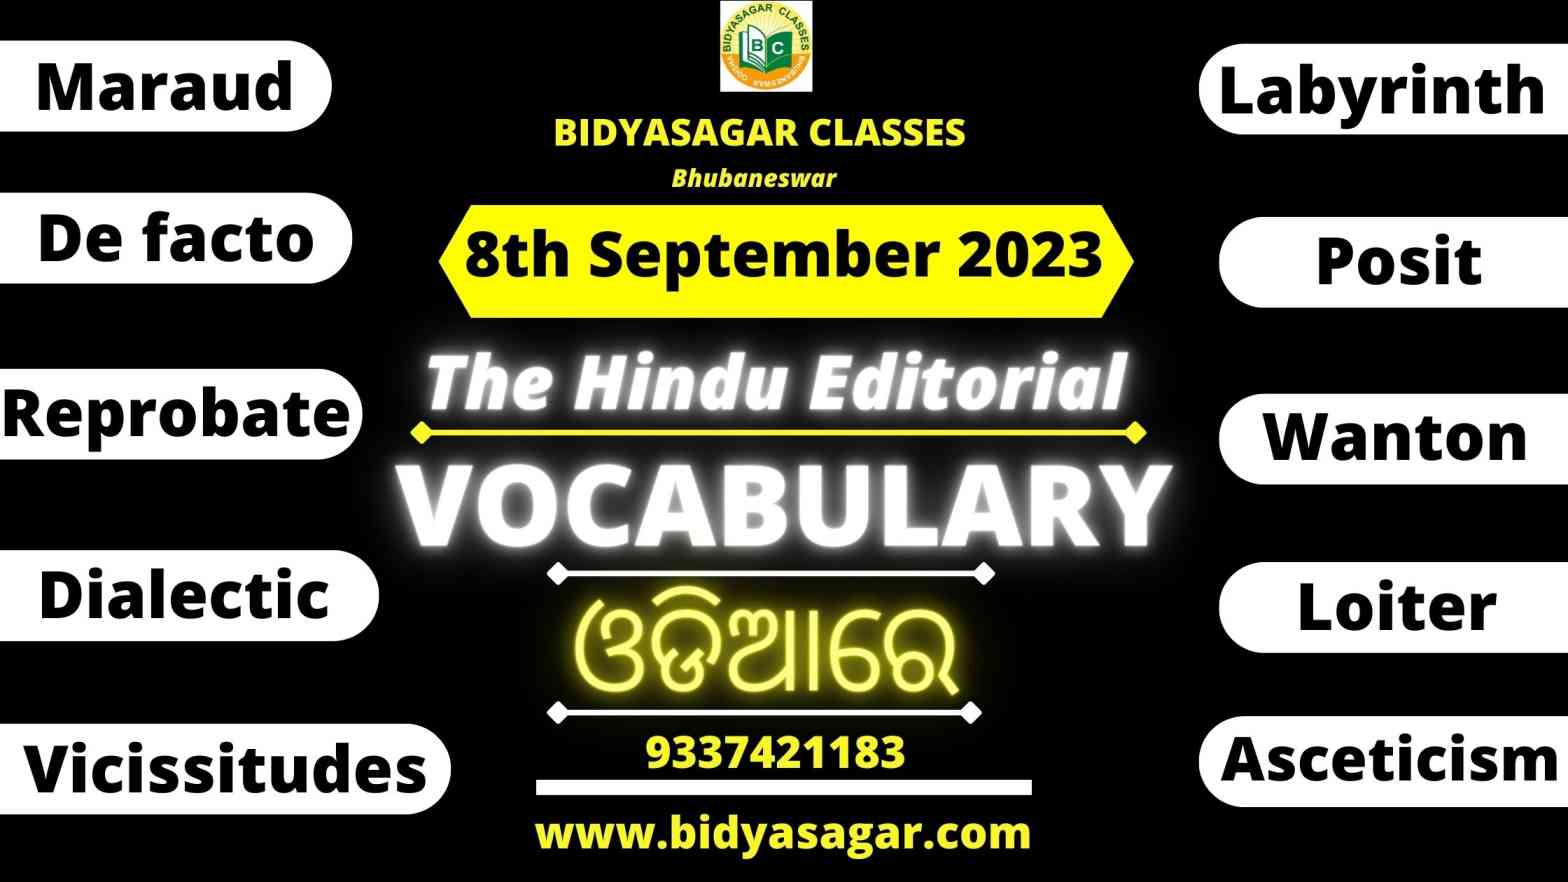 The Hindu Editorial Vocabulary of 8th September 2023